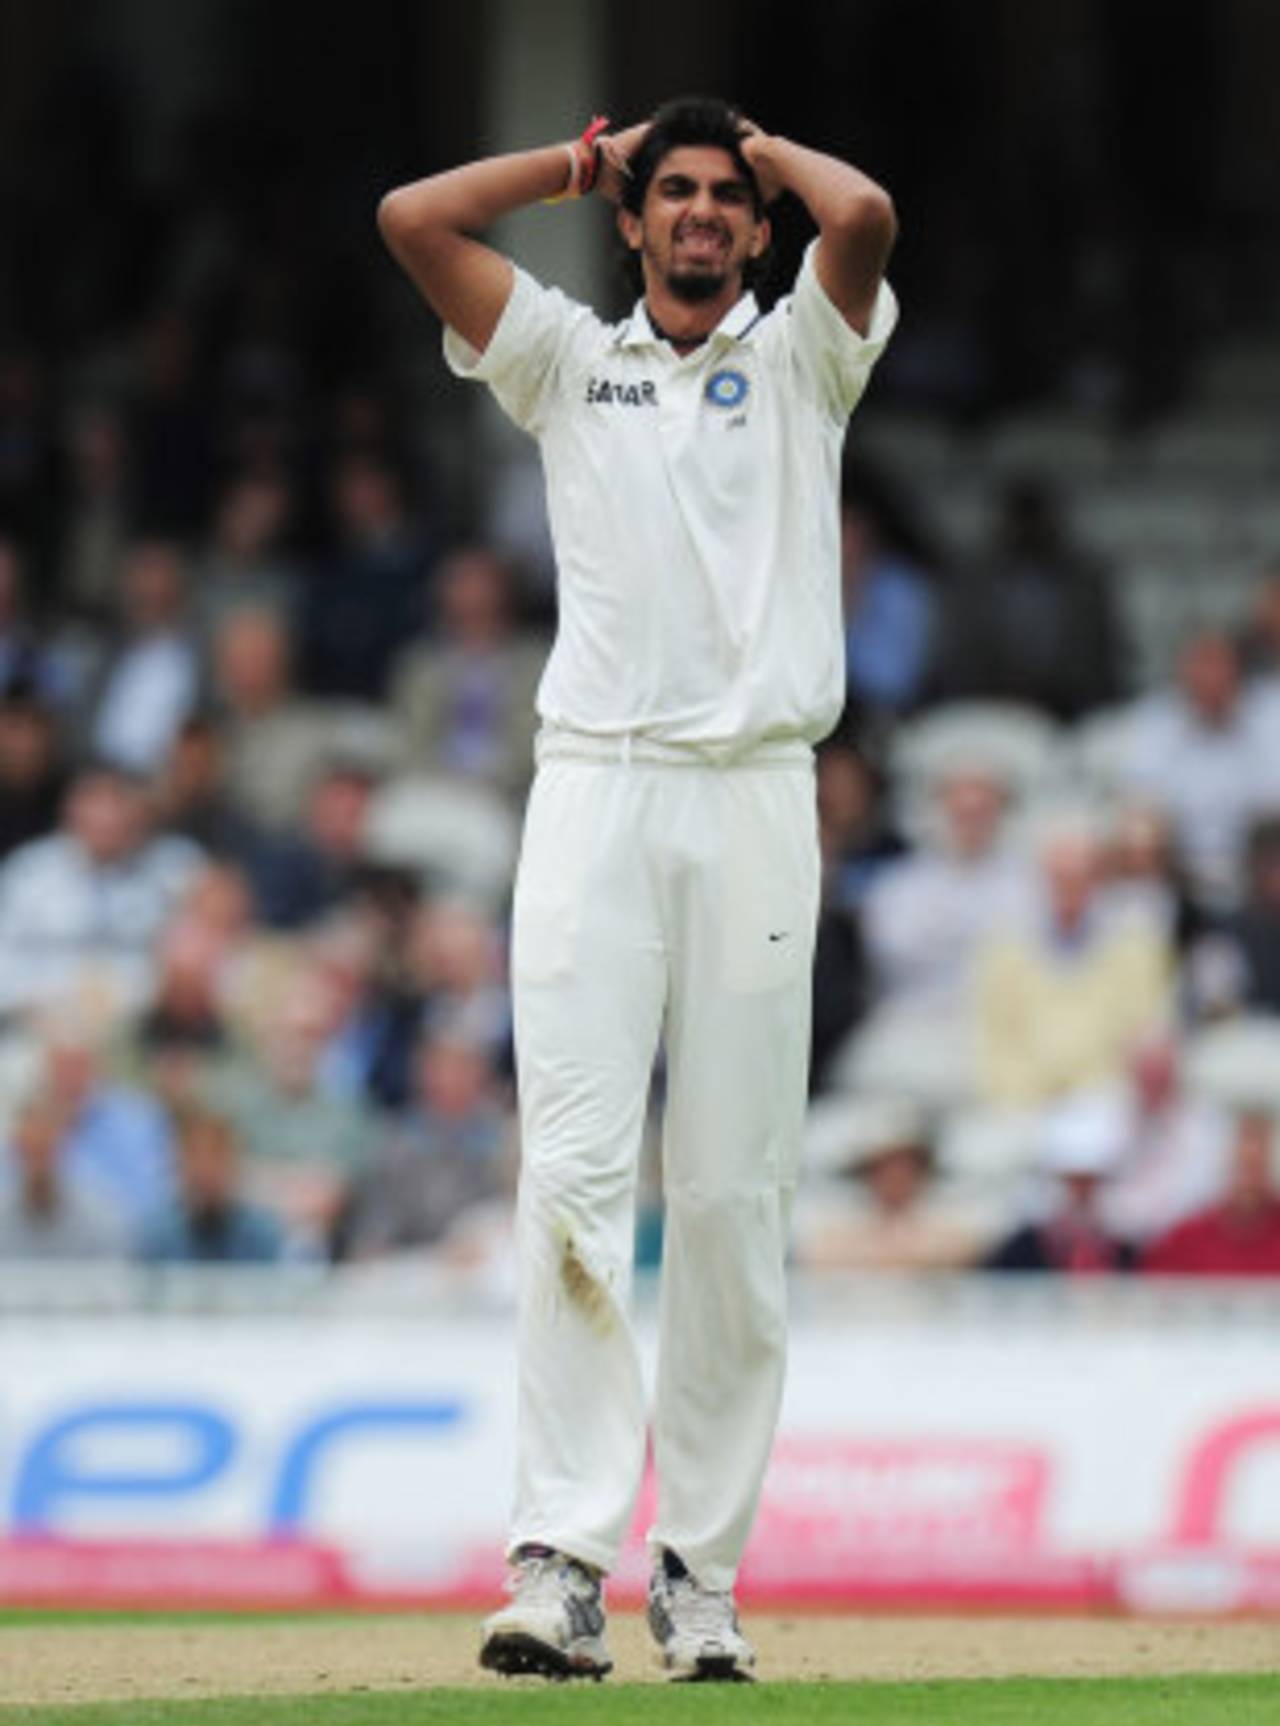 Ishant Sharma reacts after troubling the batsman, England v India, 4th Test, The Oval, 1st day, August 18, 2011